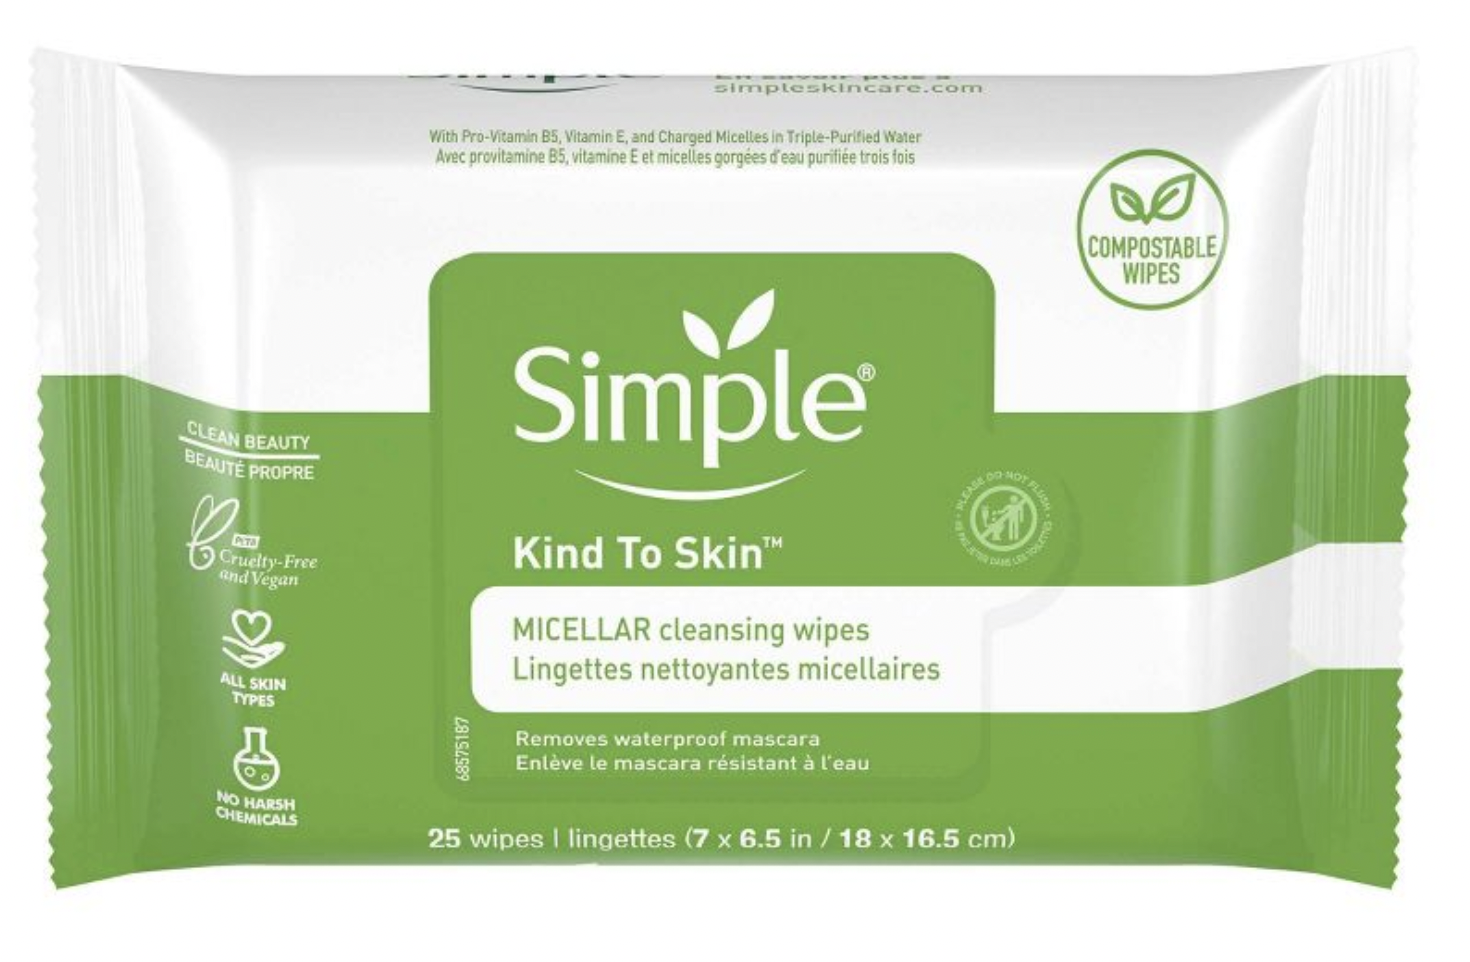 Simple makeup remover wipes